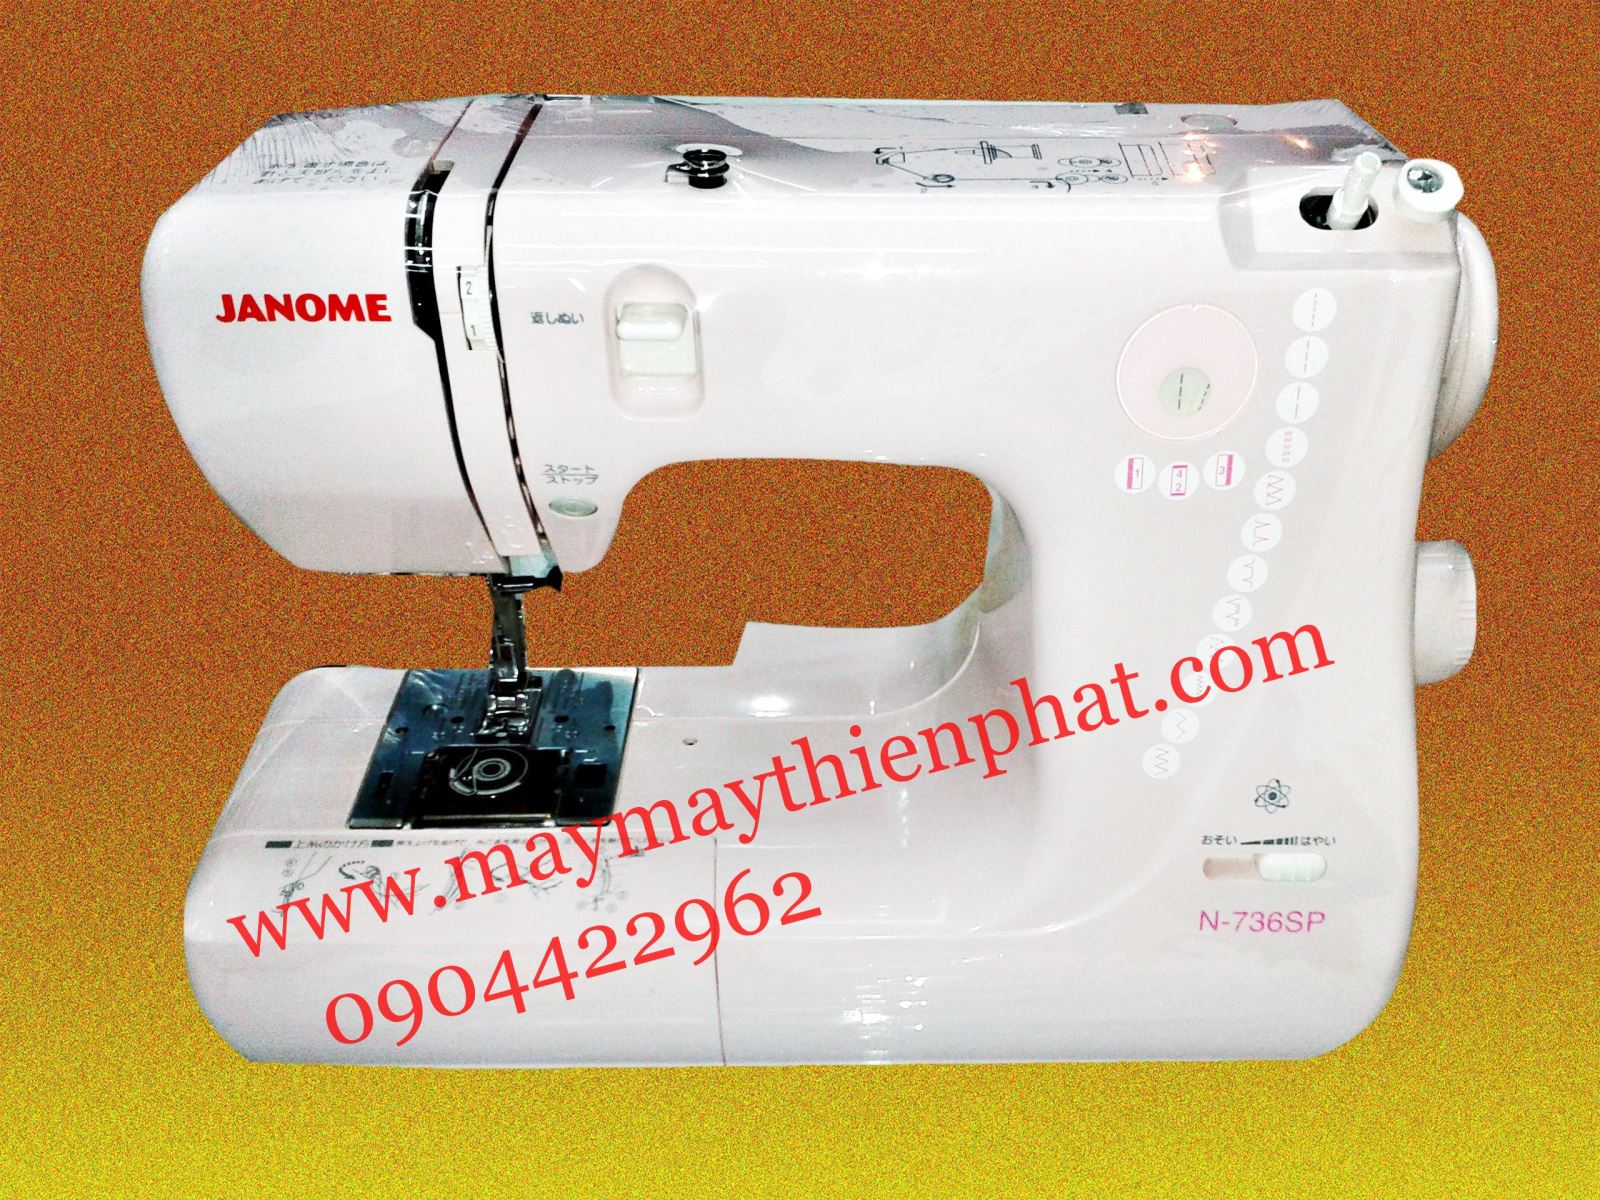 JANOME N-736-SP